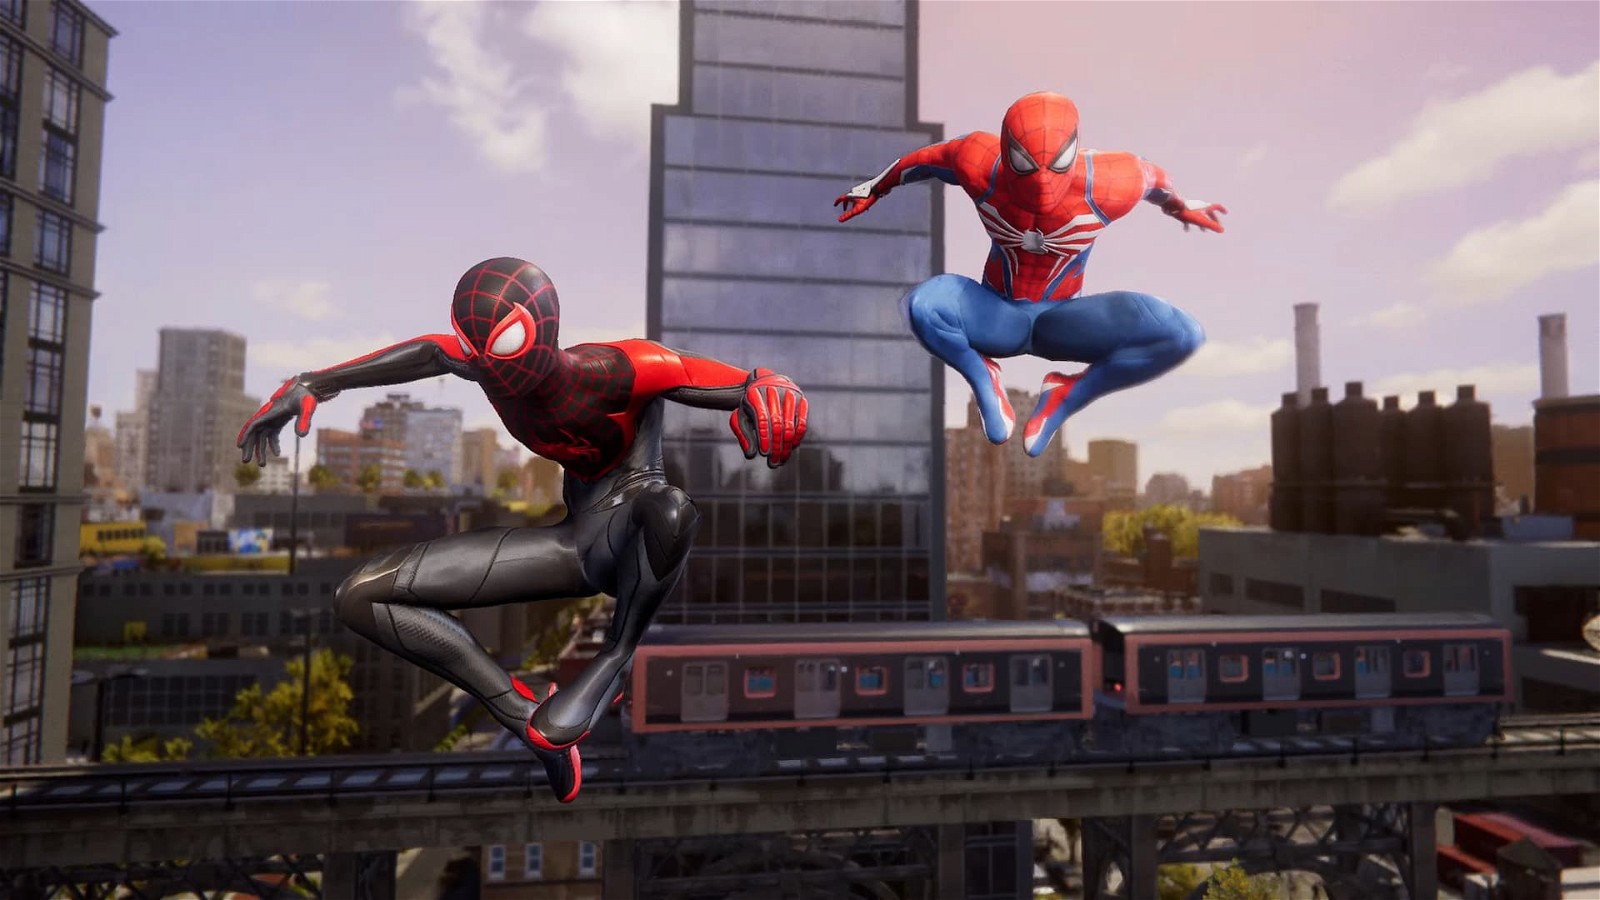 Marvel's Spider-Man 2 will bring both Spideys in action to save NYC